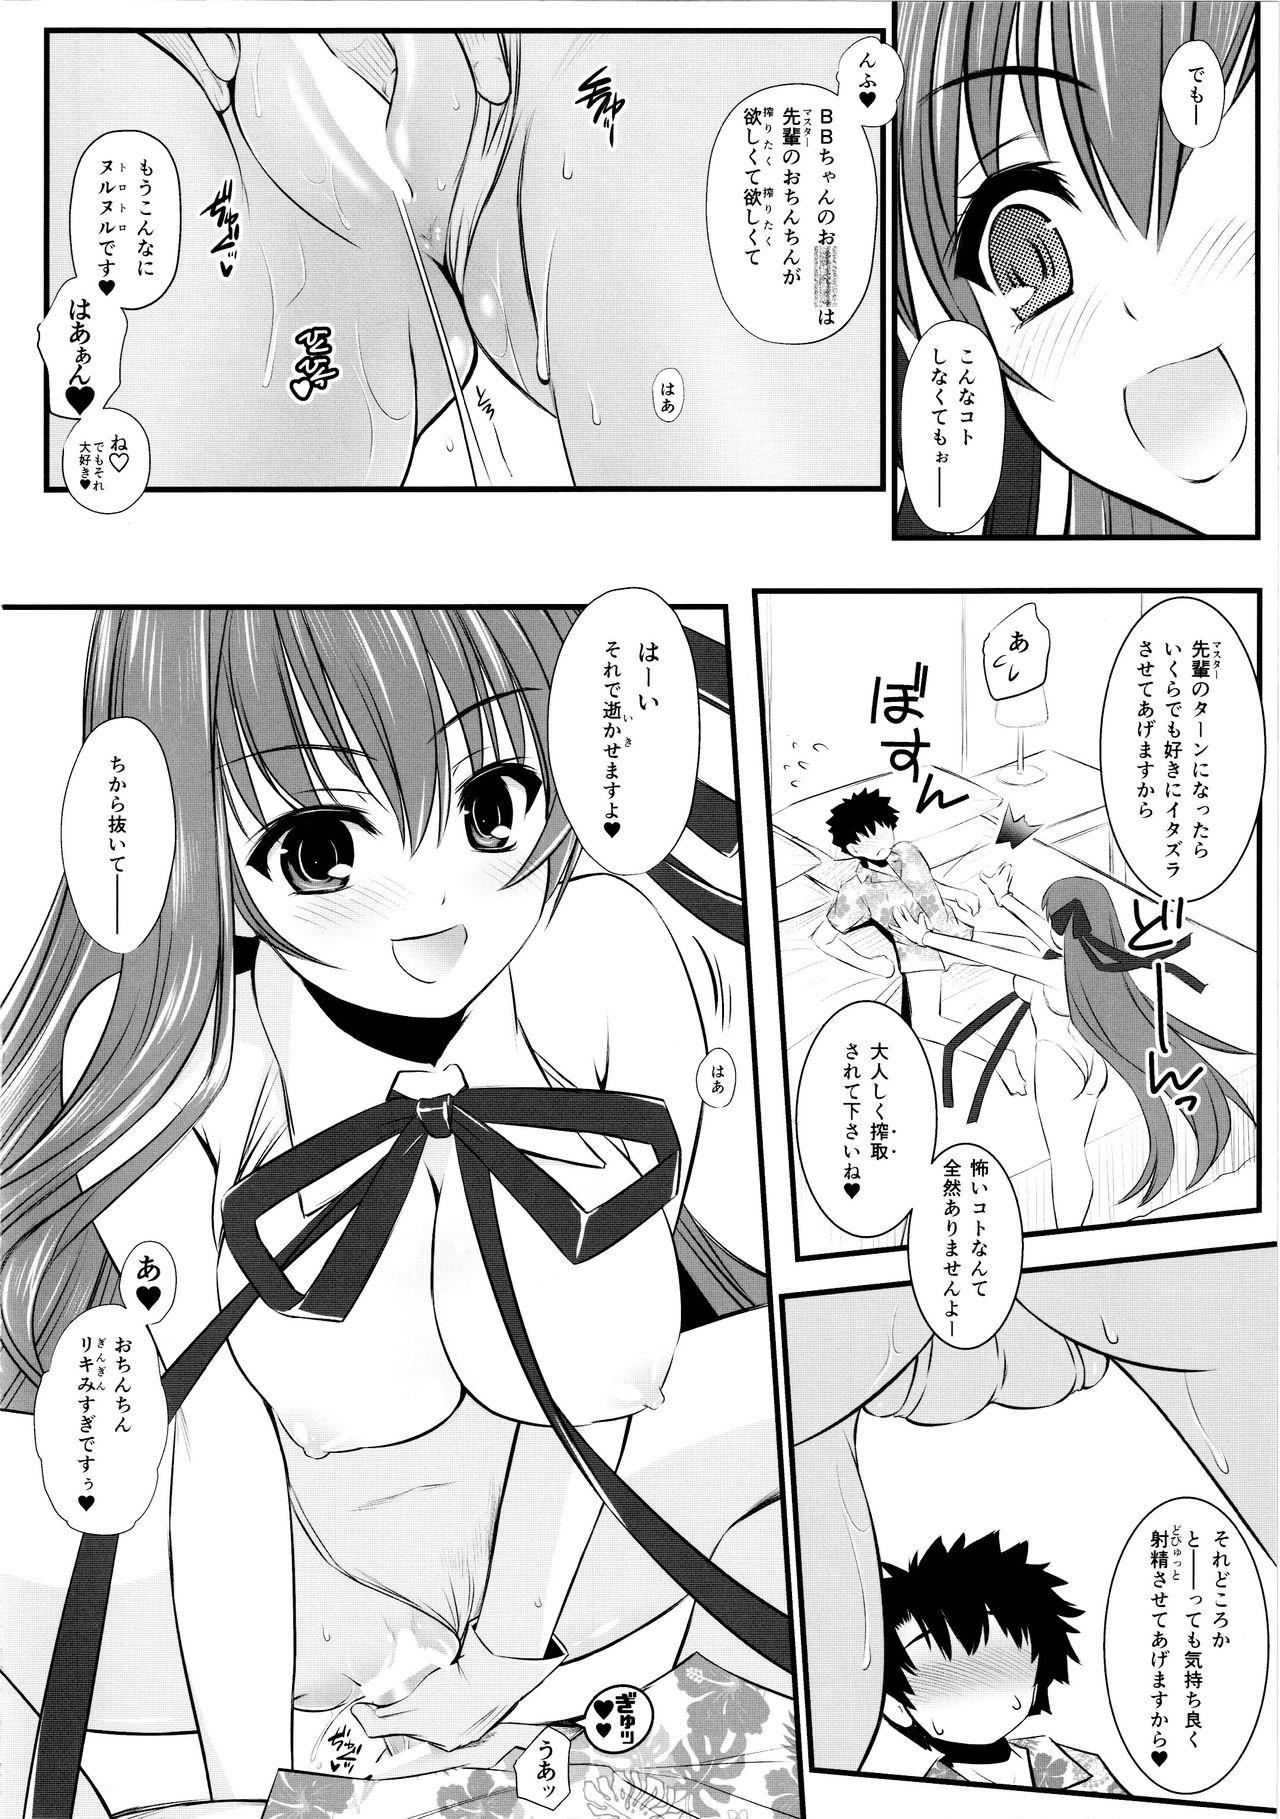 Women Fucking (C96) [Yakan Honpo (Inoue Tommy)] Queen [Kyuuin] BB-chan (Fate/Grand Order) - Fate grand order Family Roleplay - Page 8